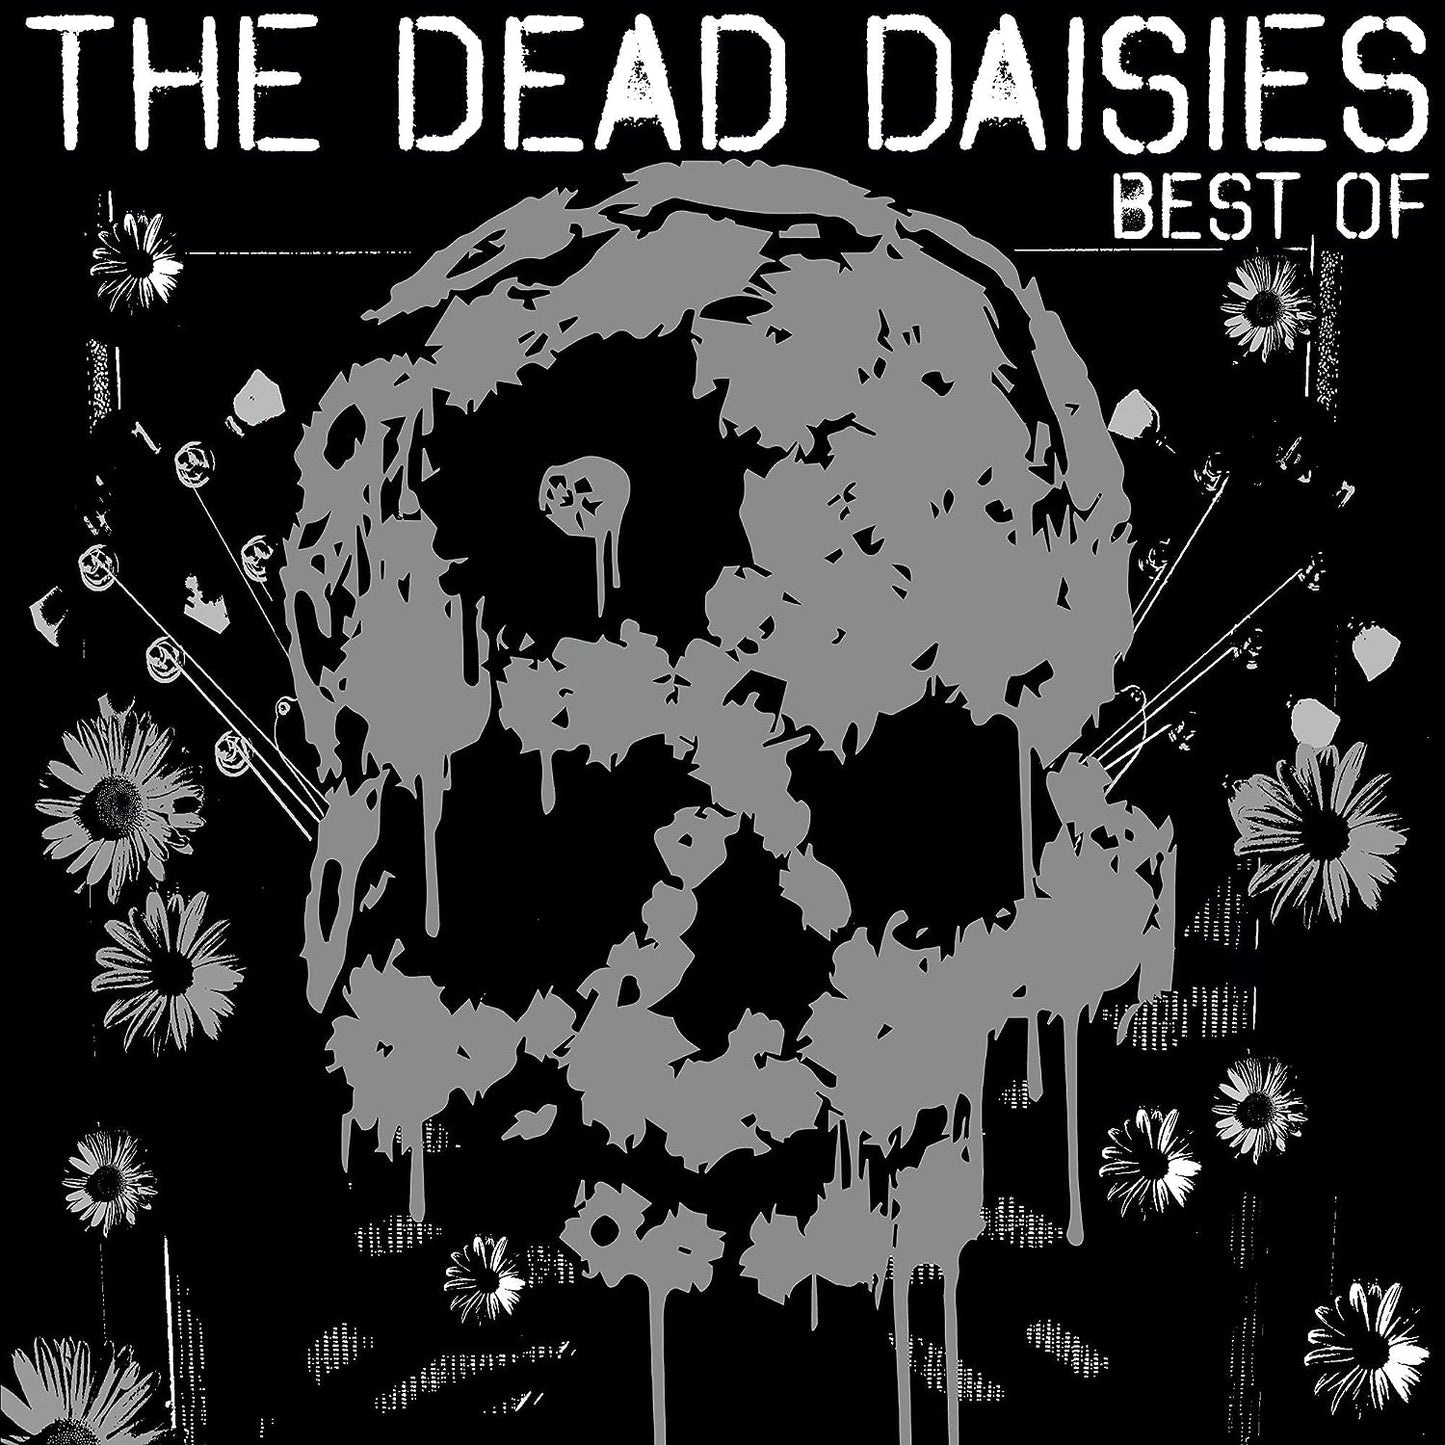 2LP - The Dead Daisies - The Best Of